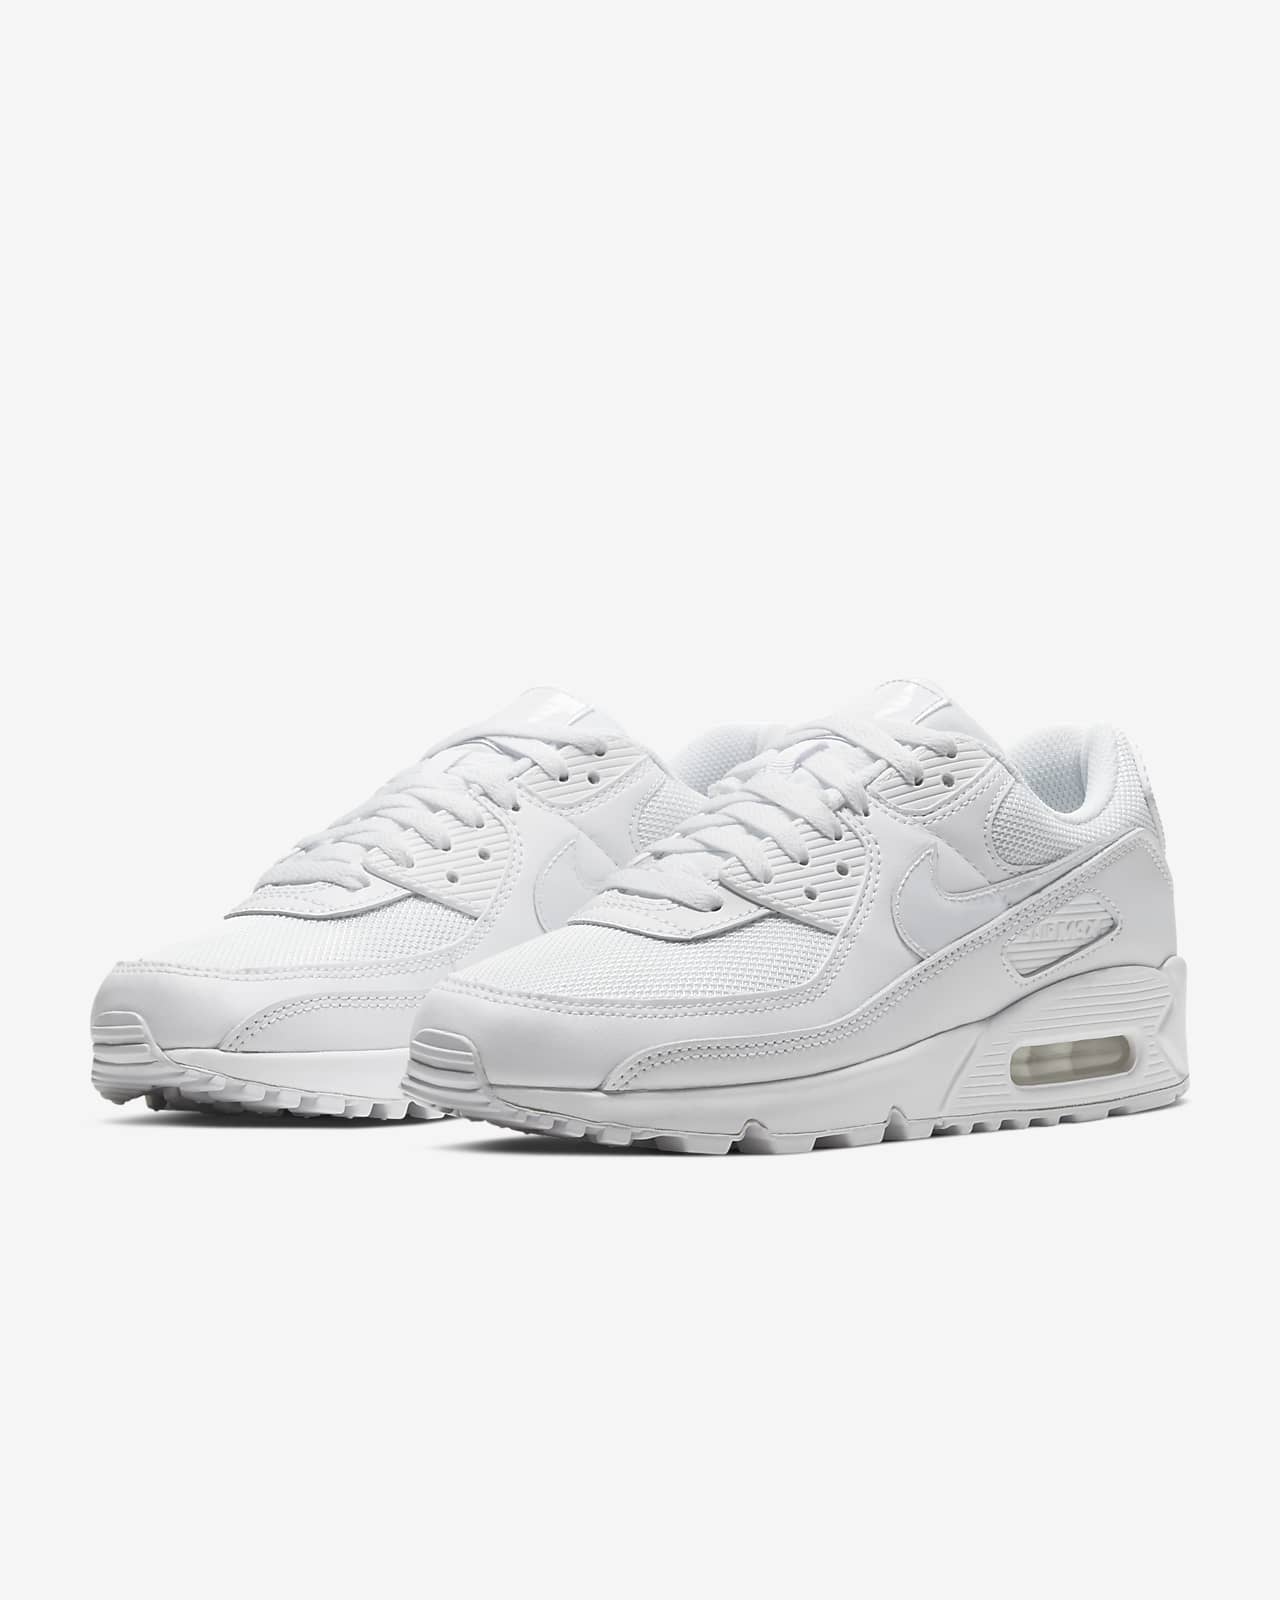 56% OFF,nike air force 90 white,albiko.rs